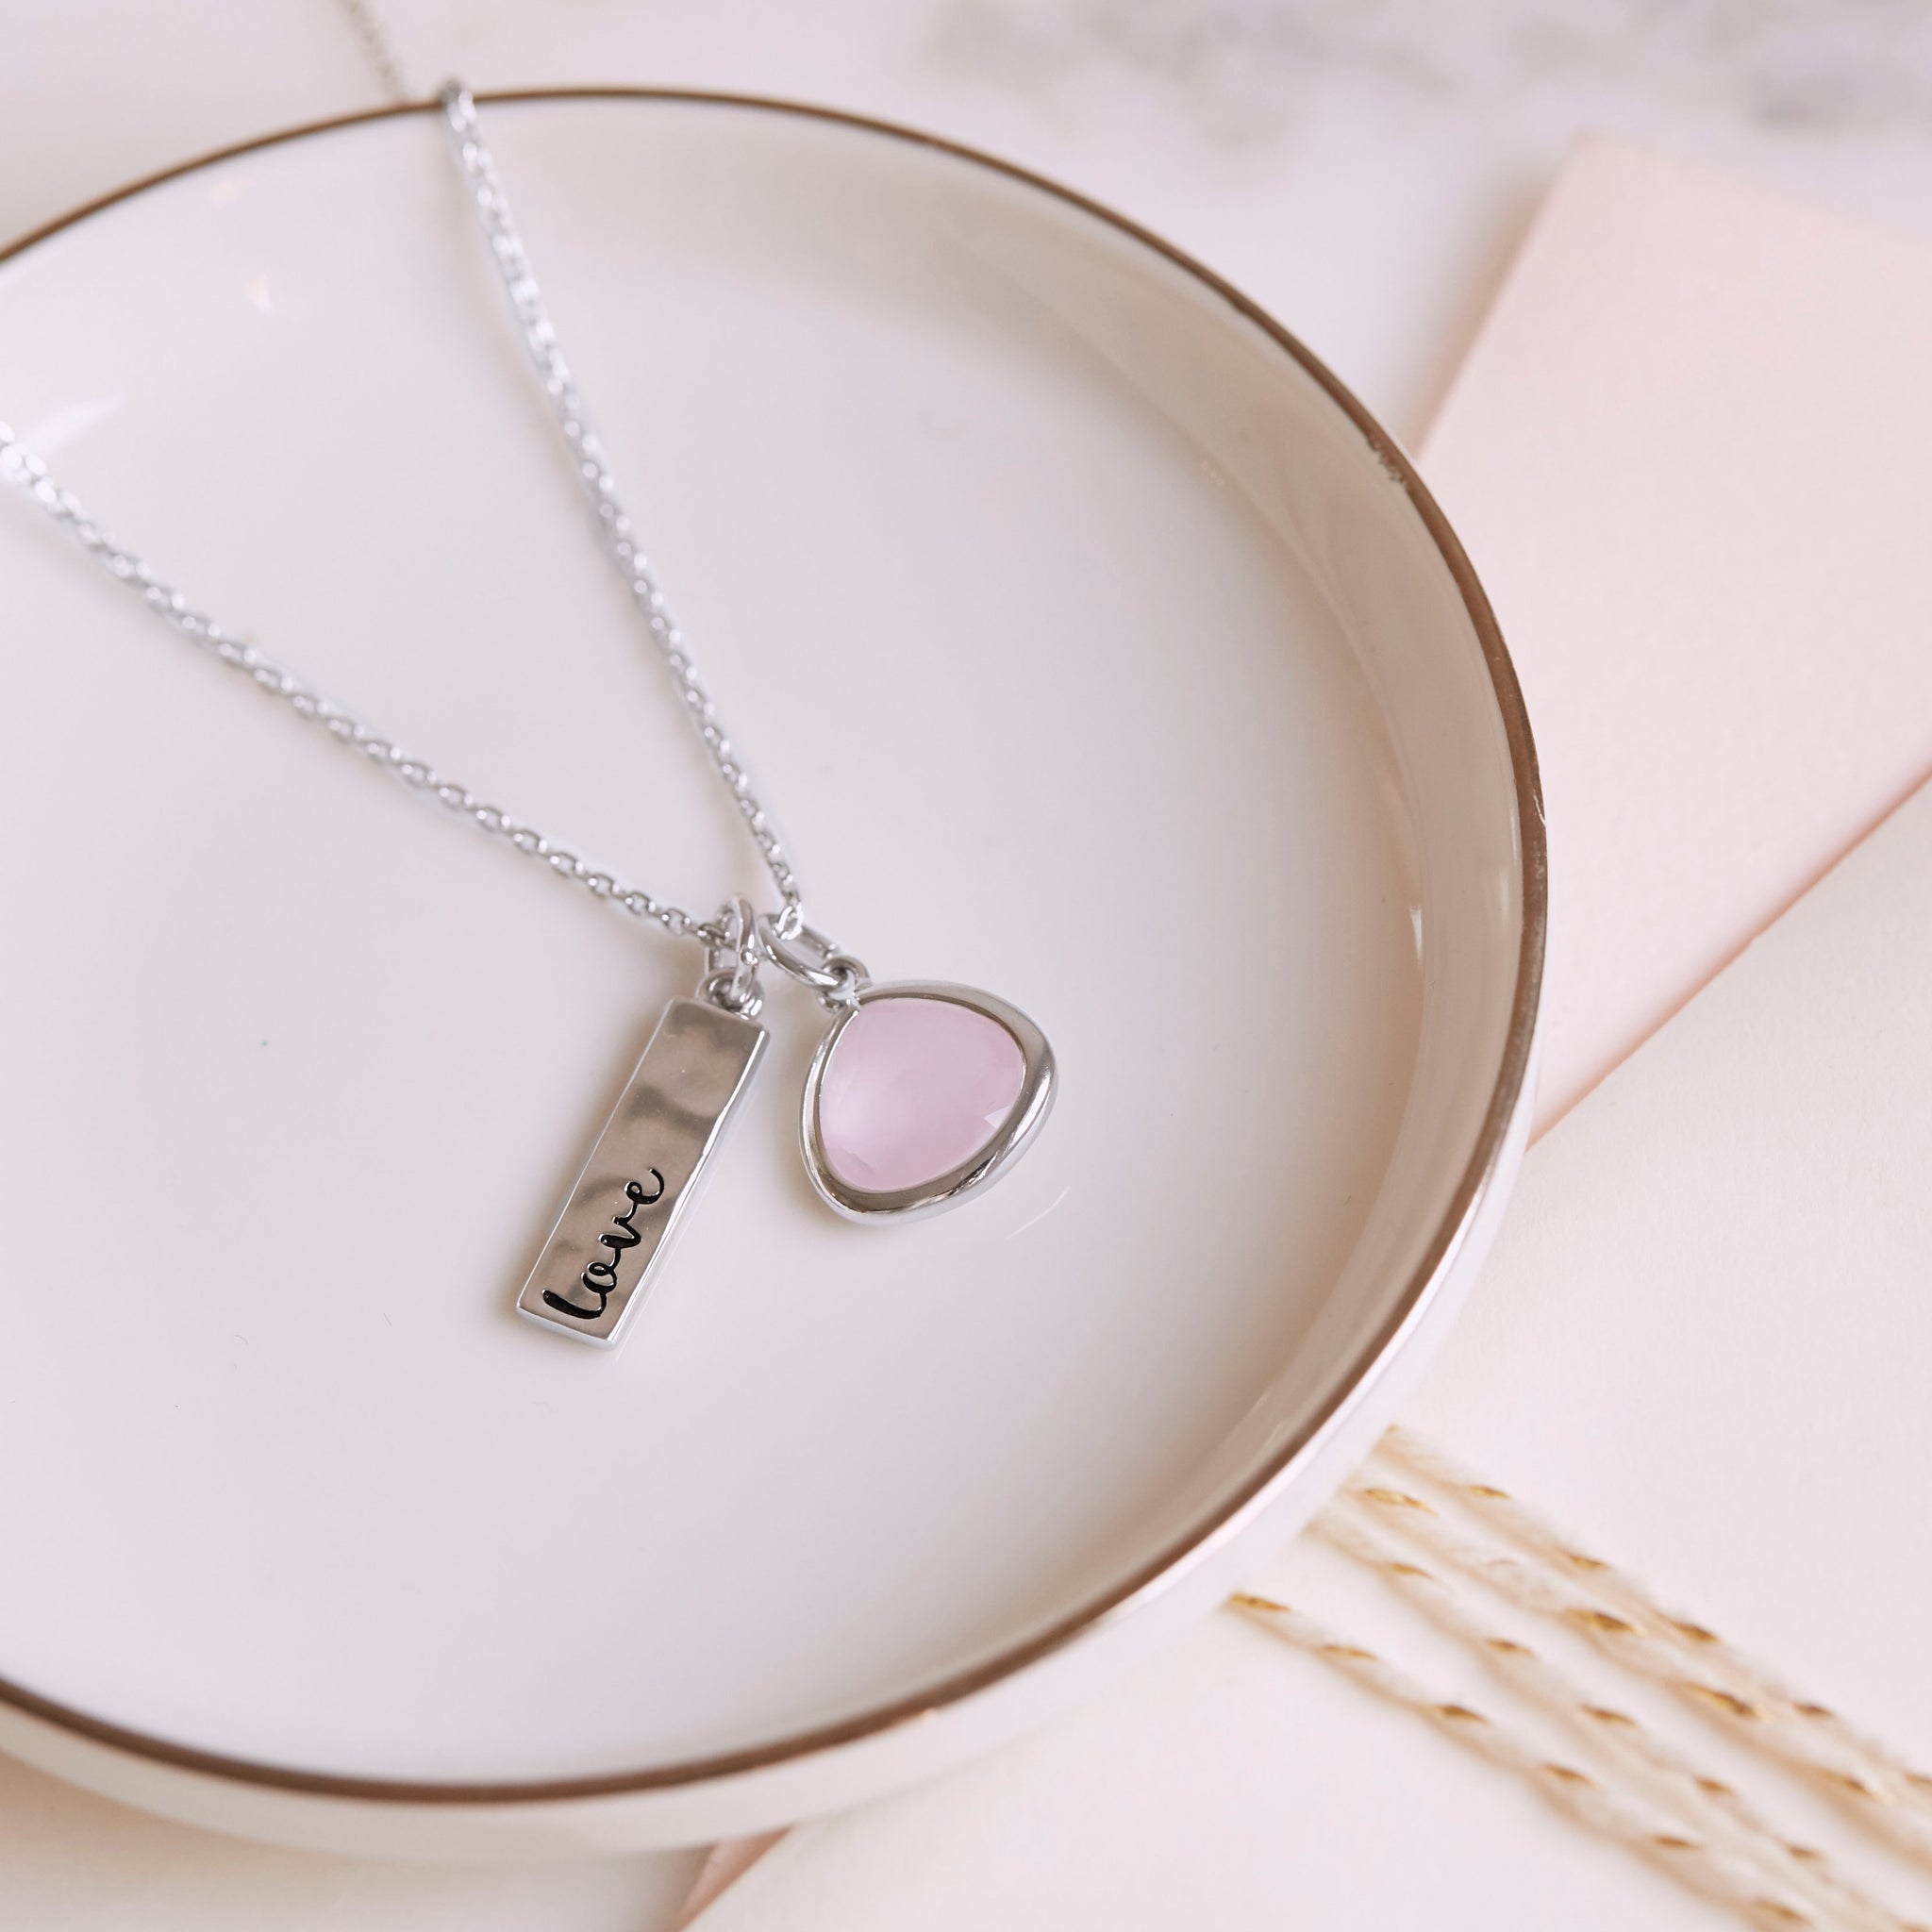 Chloe + Isabel 'Love' Charm Necklace